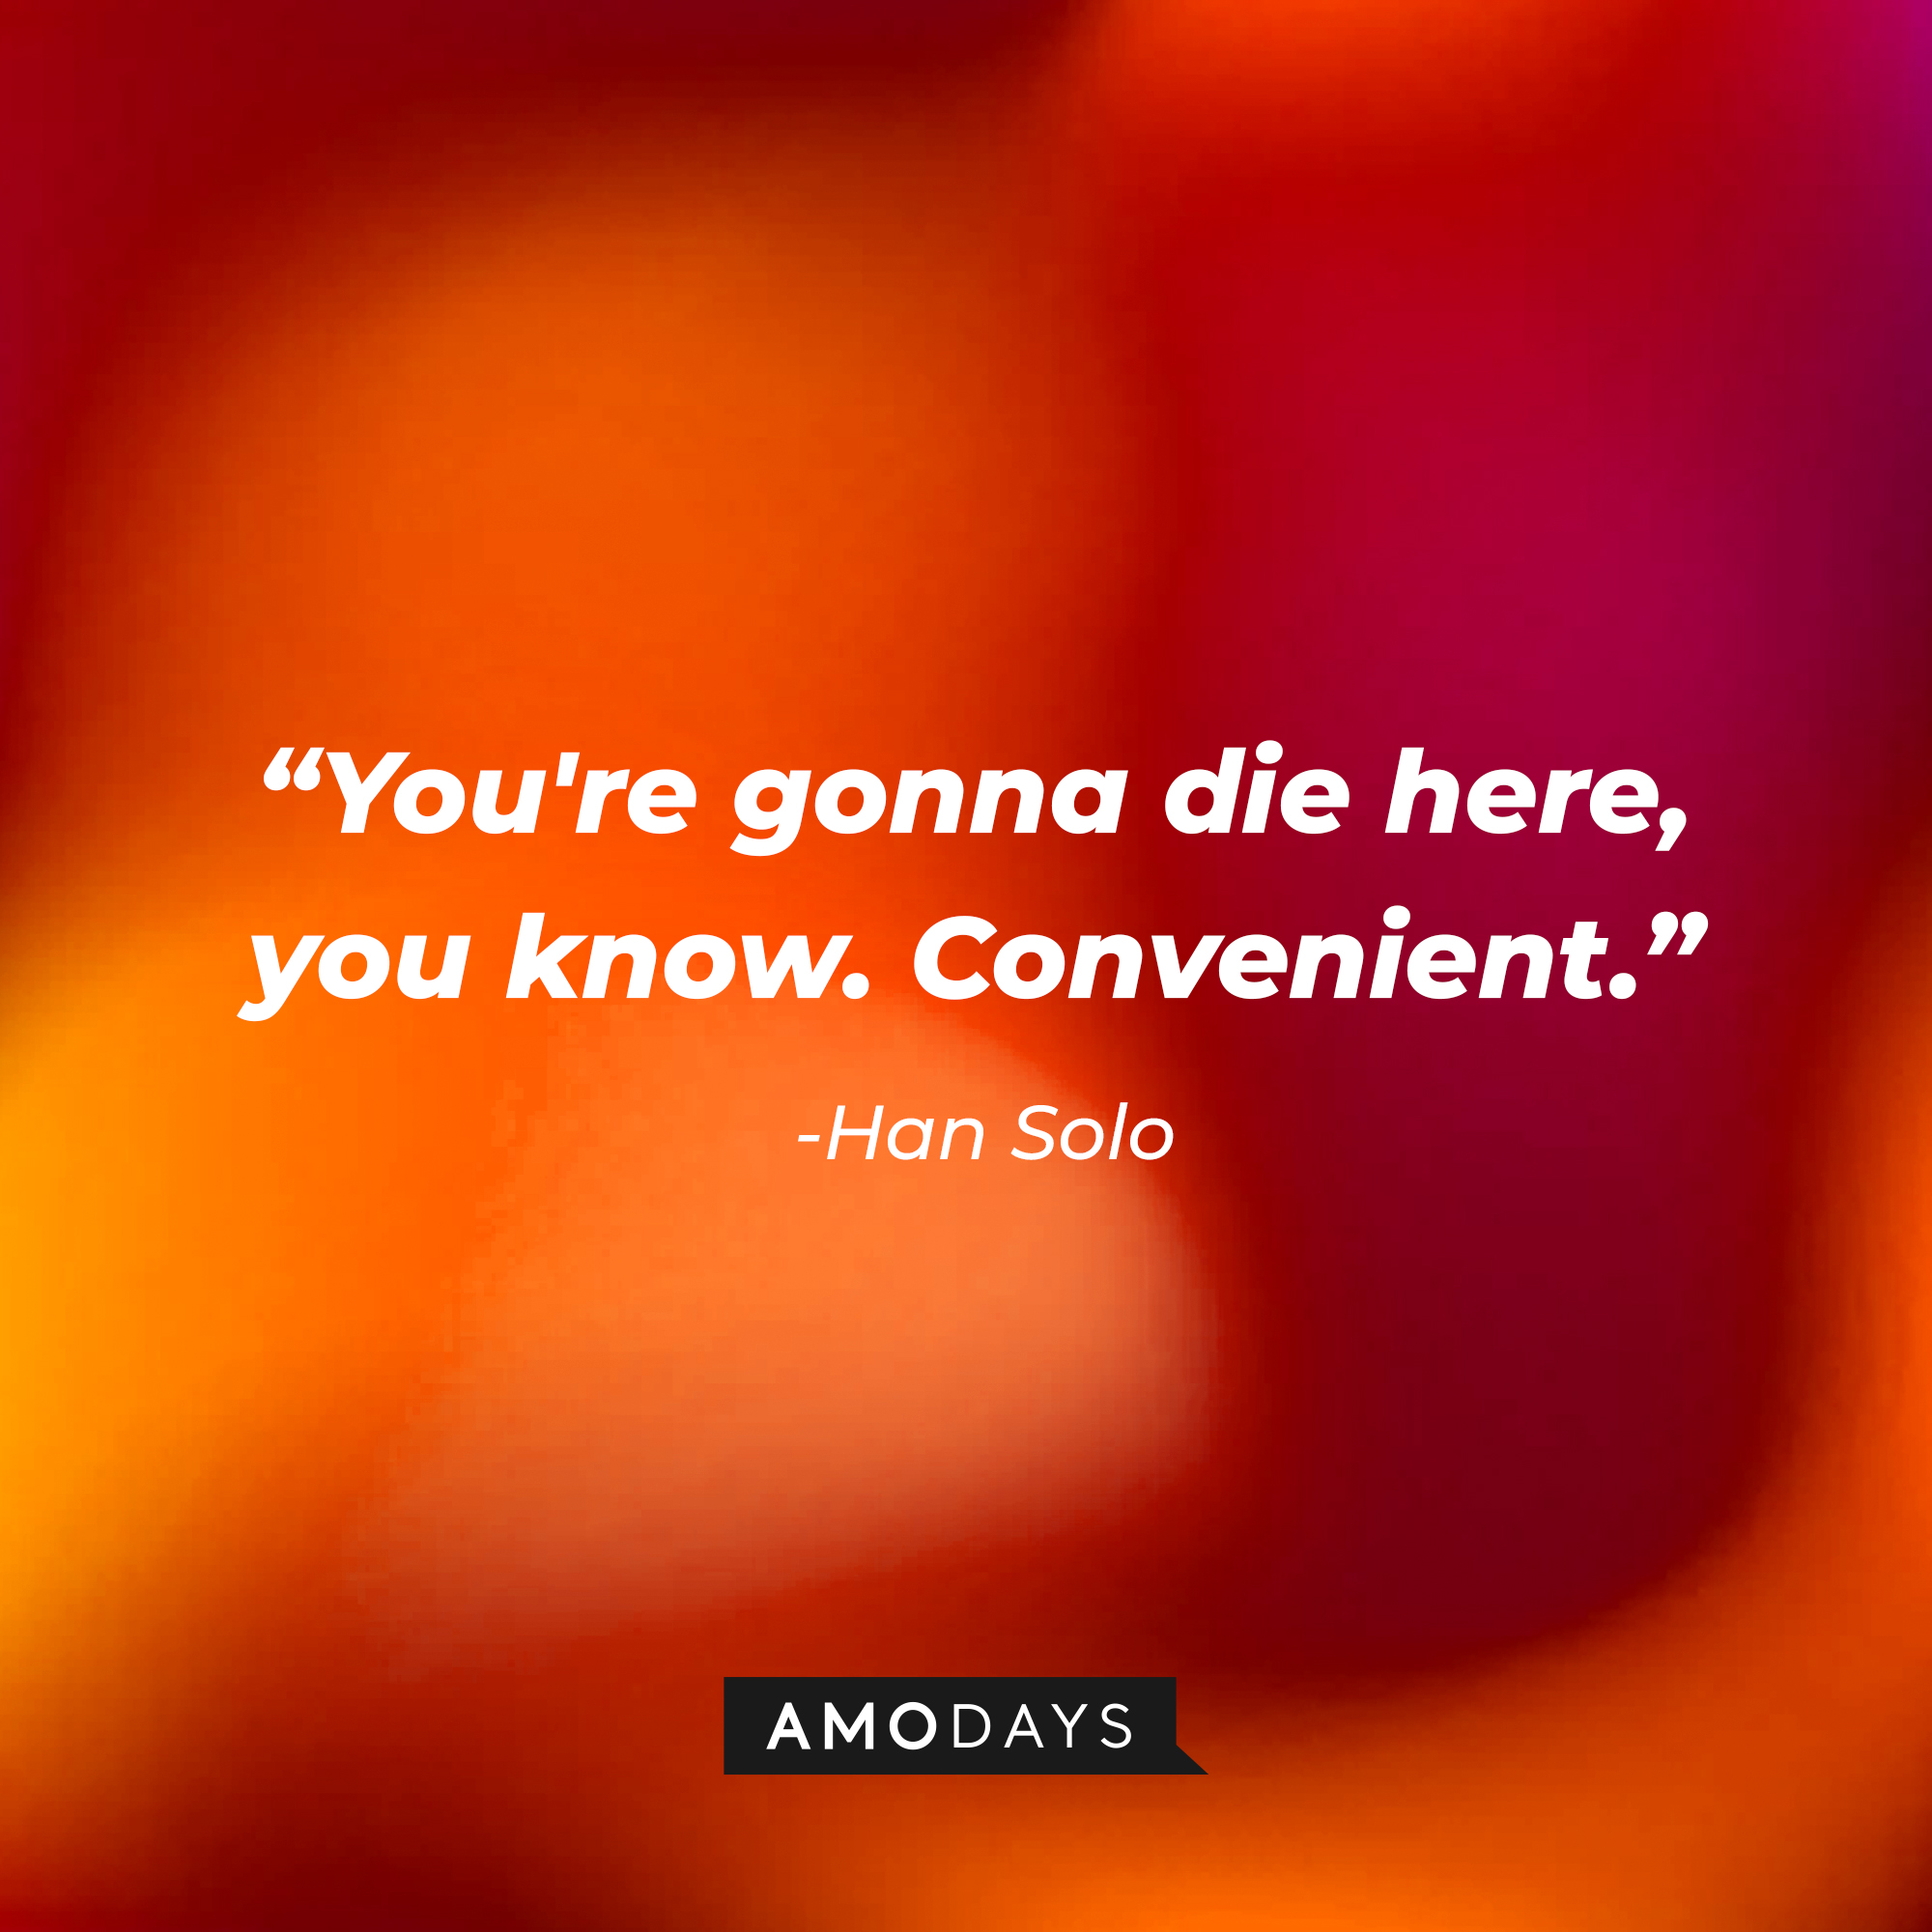 Han Solo’s quote: “You're gonna die here, you know. Convenient.”   | Source: AmoDays